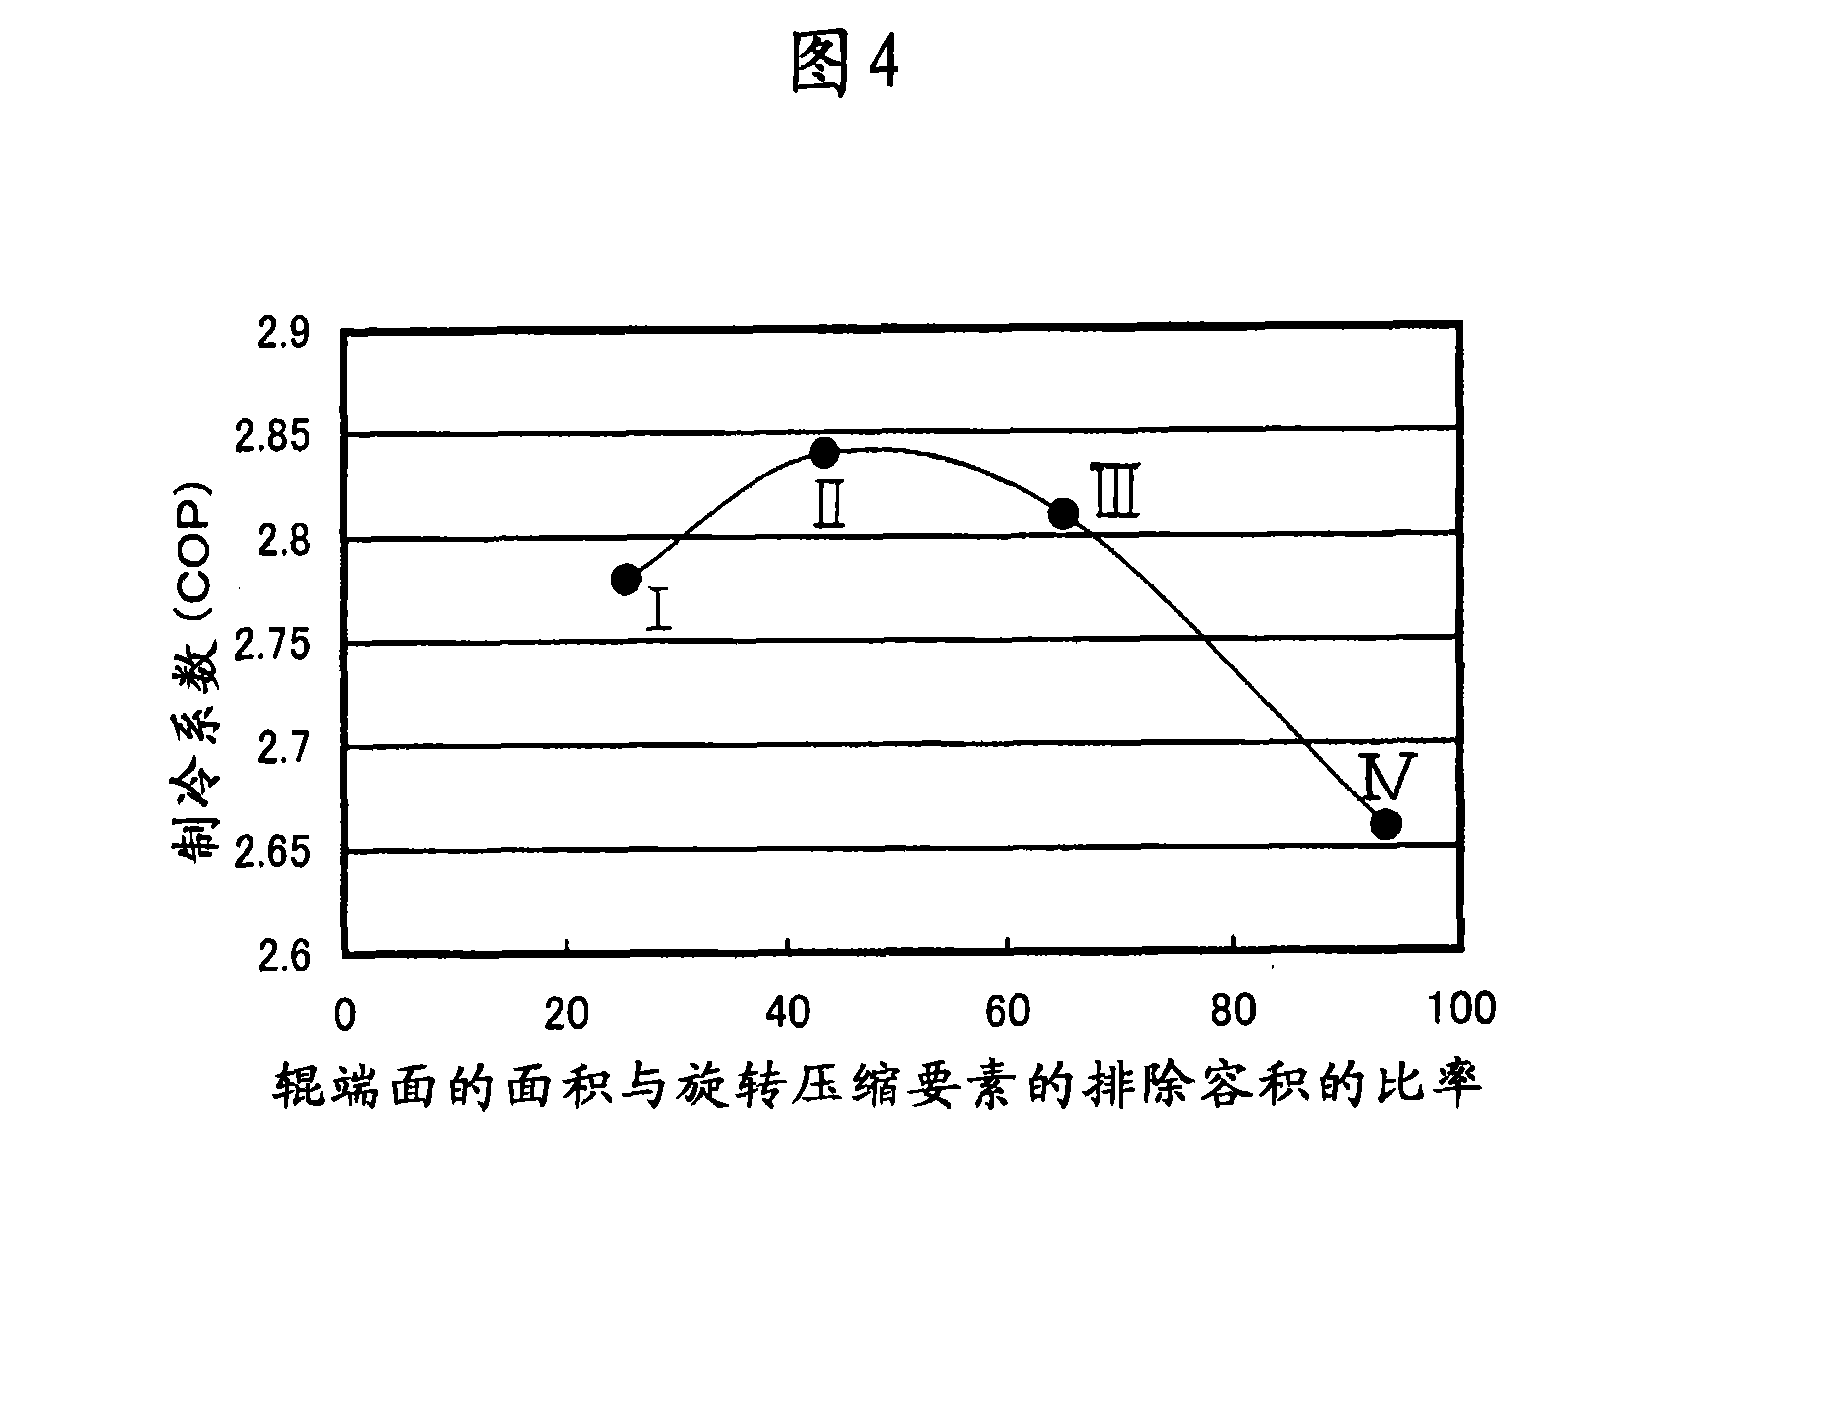 Method for manufacturing rotary compressor